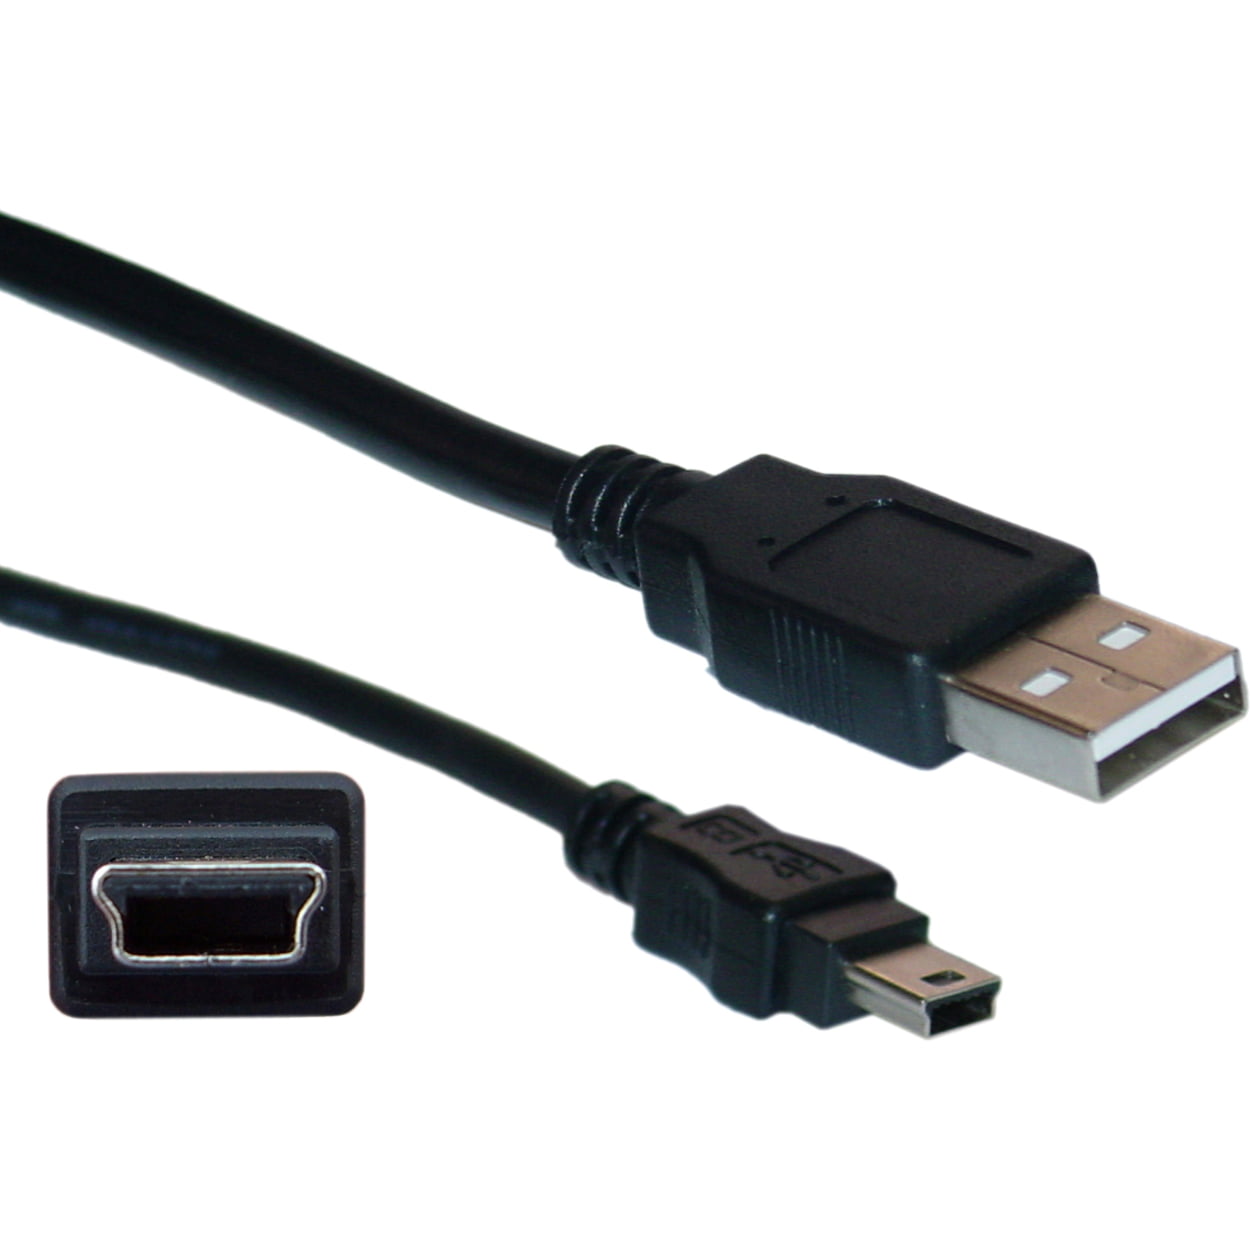 ShineBear 5m USB 2.0 to Mini 5 pin M/M Power Supply Cable A Male to 5P B Male for GPS MP3 MP4 SLR Digital Camera Tablet PC Cable Length: 3m, Color: Black 